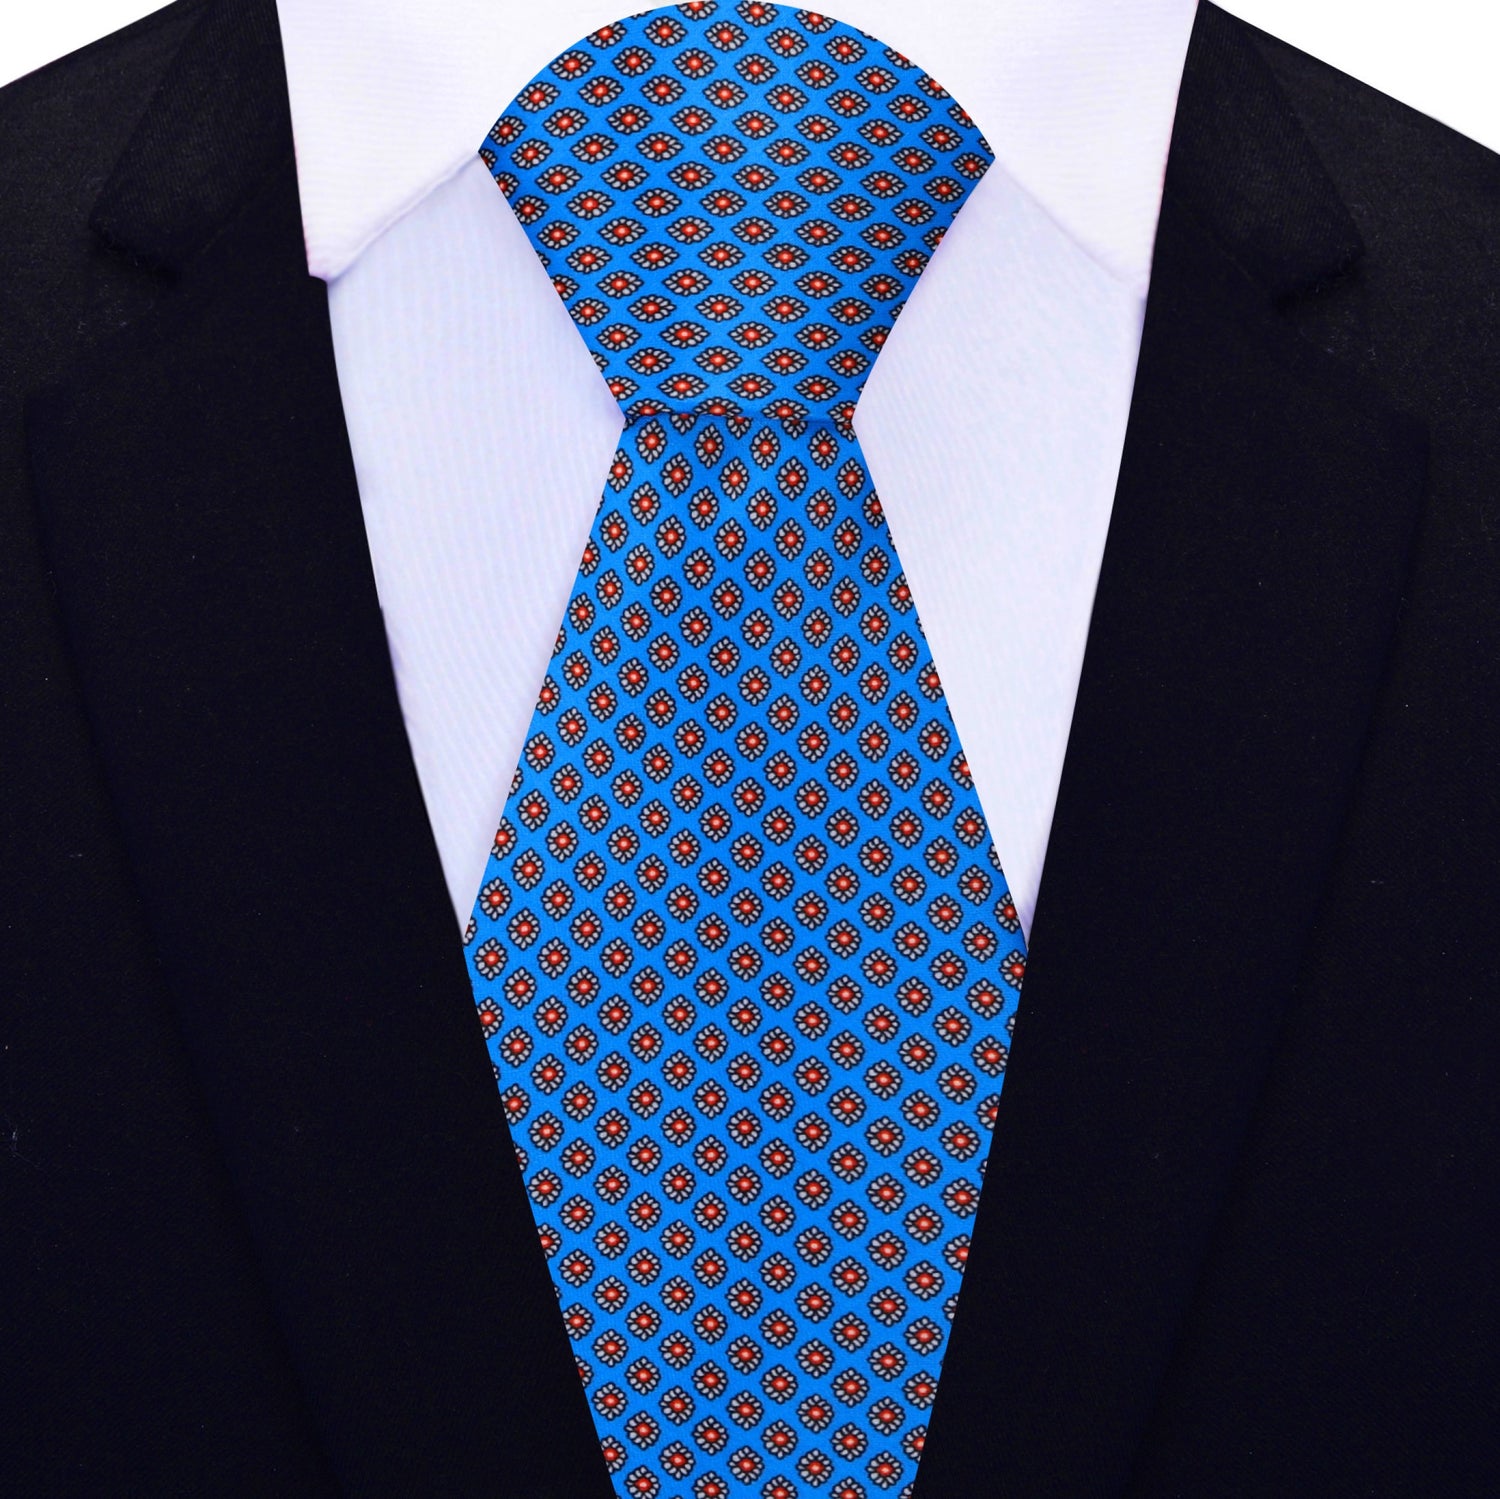 Alt View: Blue with red and white small medallions necktie